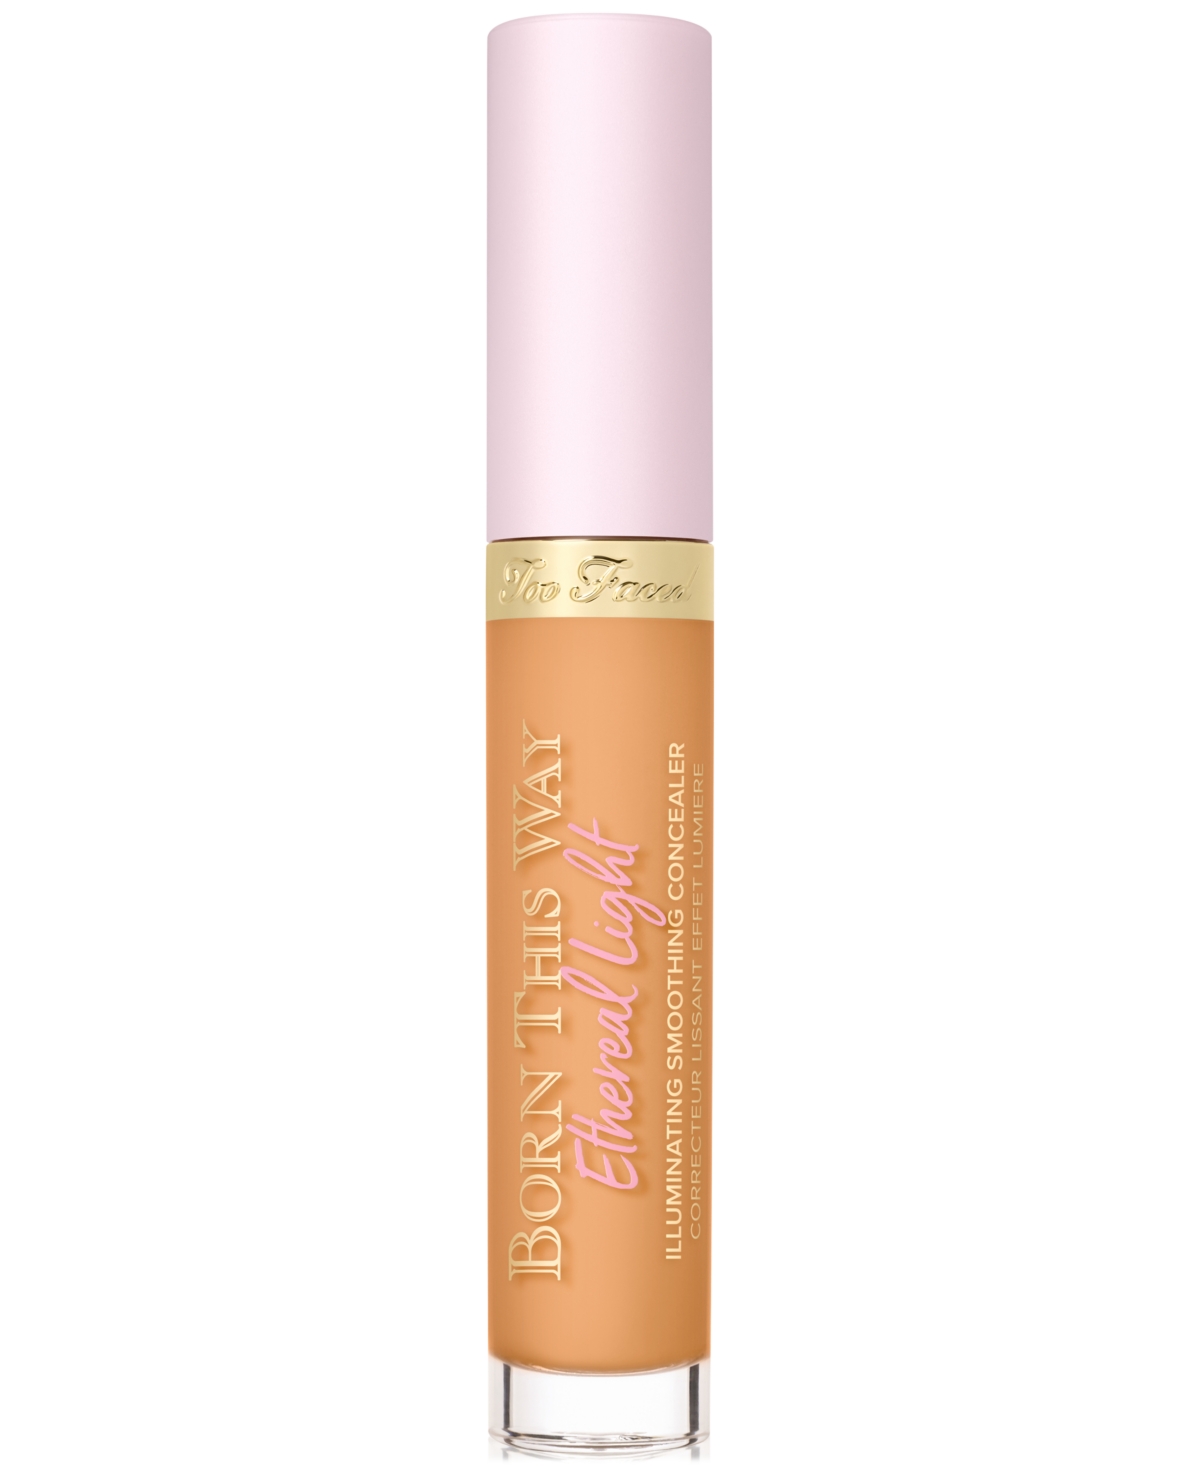 Too Faced Born This Way Ethereal Light Illuminating Smoothing Concealer In Gingersnap - Tan With Golden Undertones